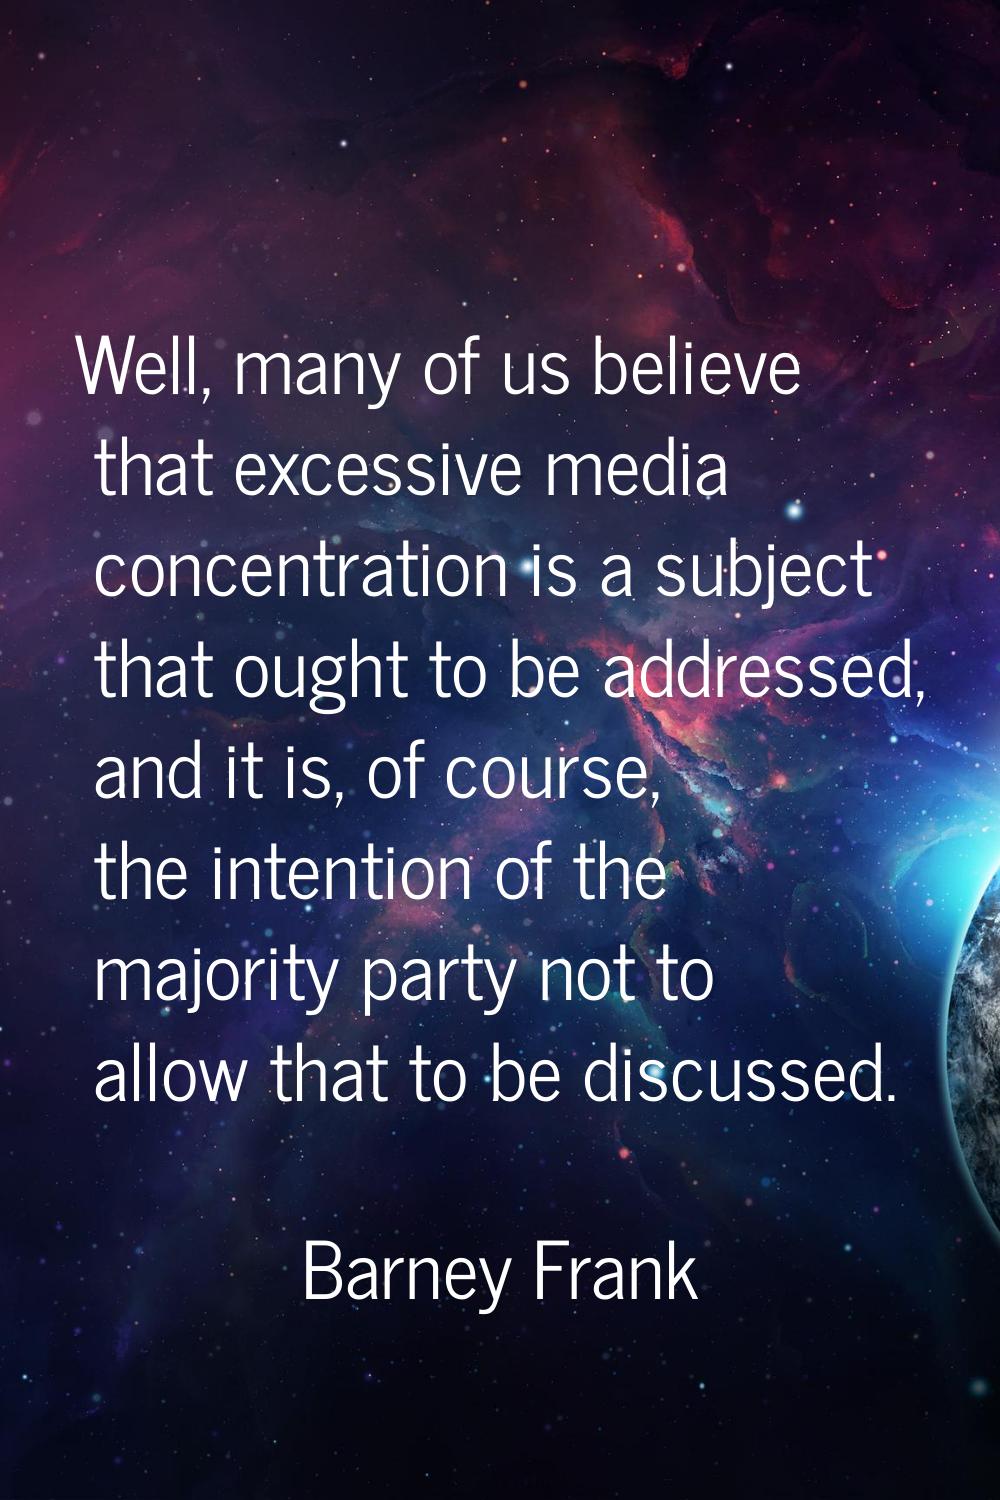 Well, many of us believe that excessive media concentration is a subject that ought to be addressed